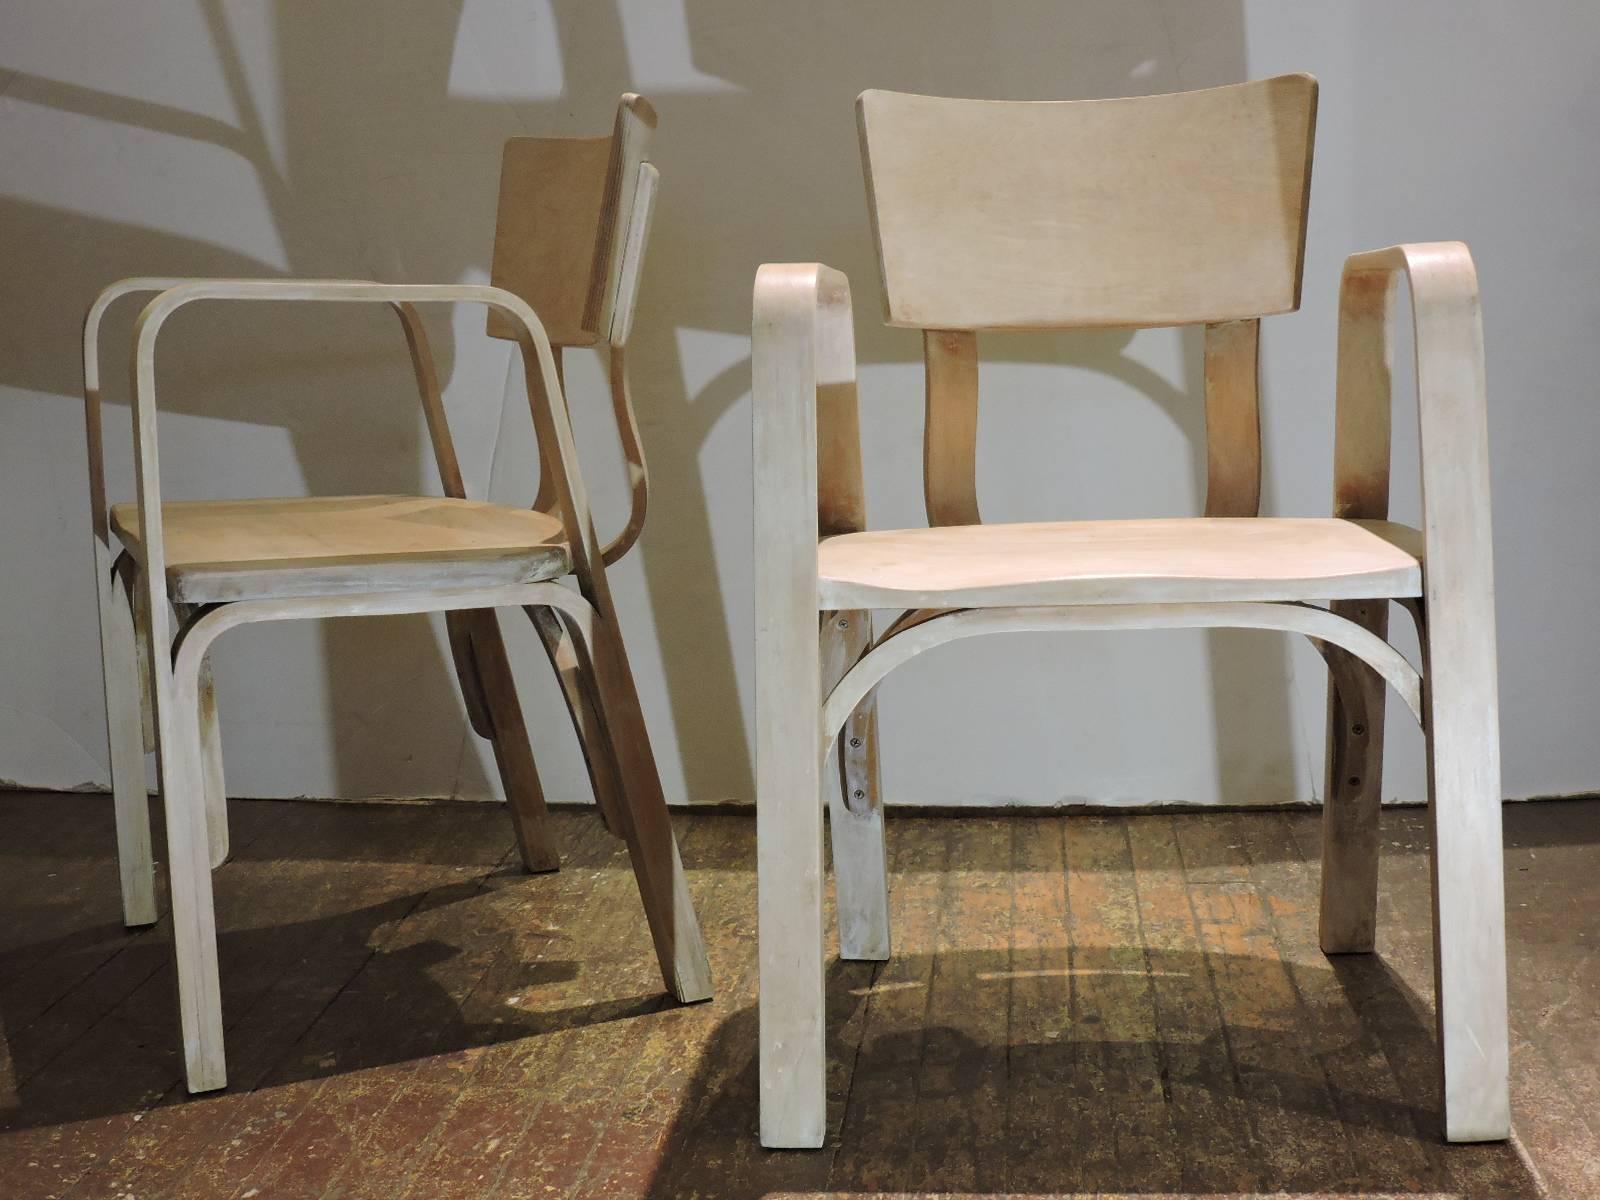 A good looking pair of mid 20th century Thonet bent laminated plywood armchairs in a bleached & limed pale parchment like finish. Stamped Thonet - New York under seats